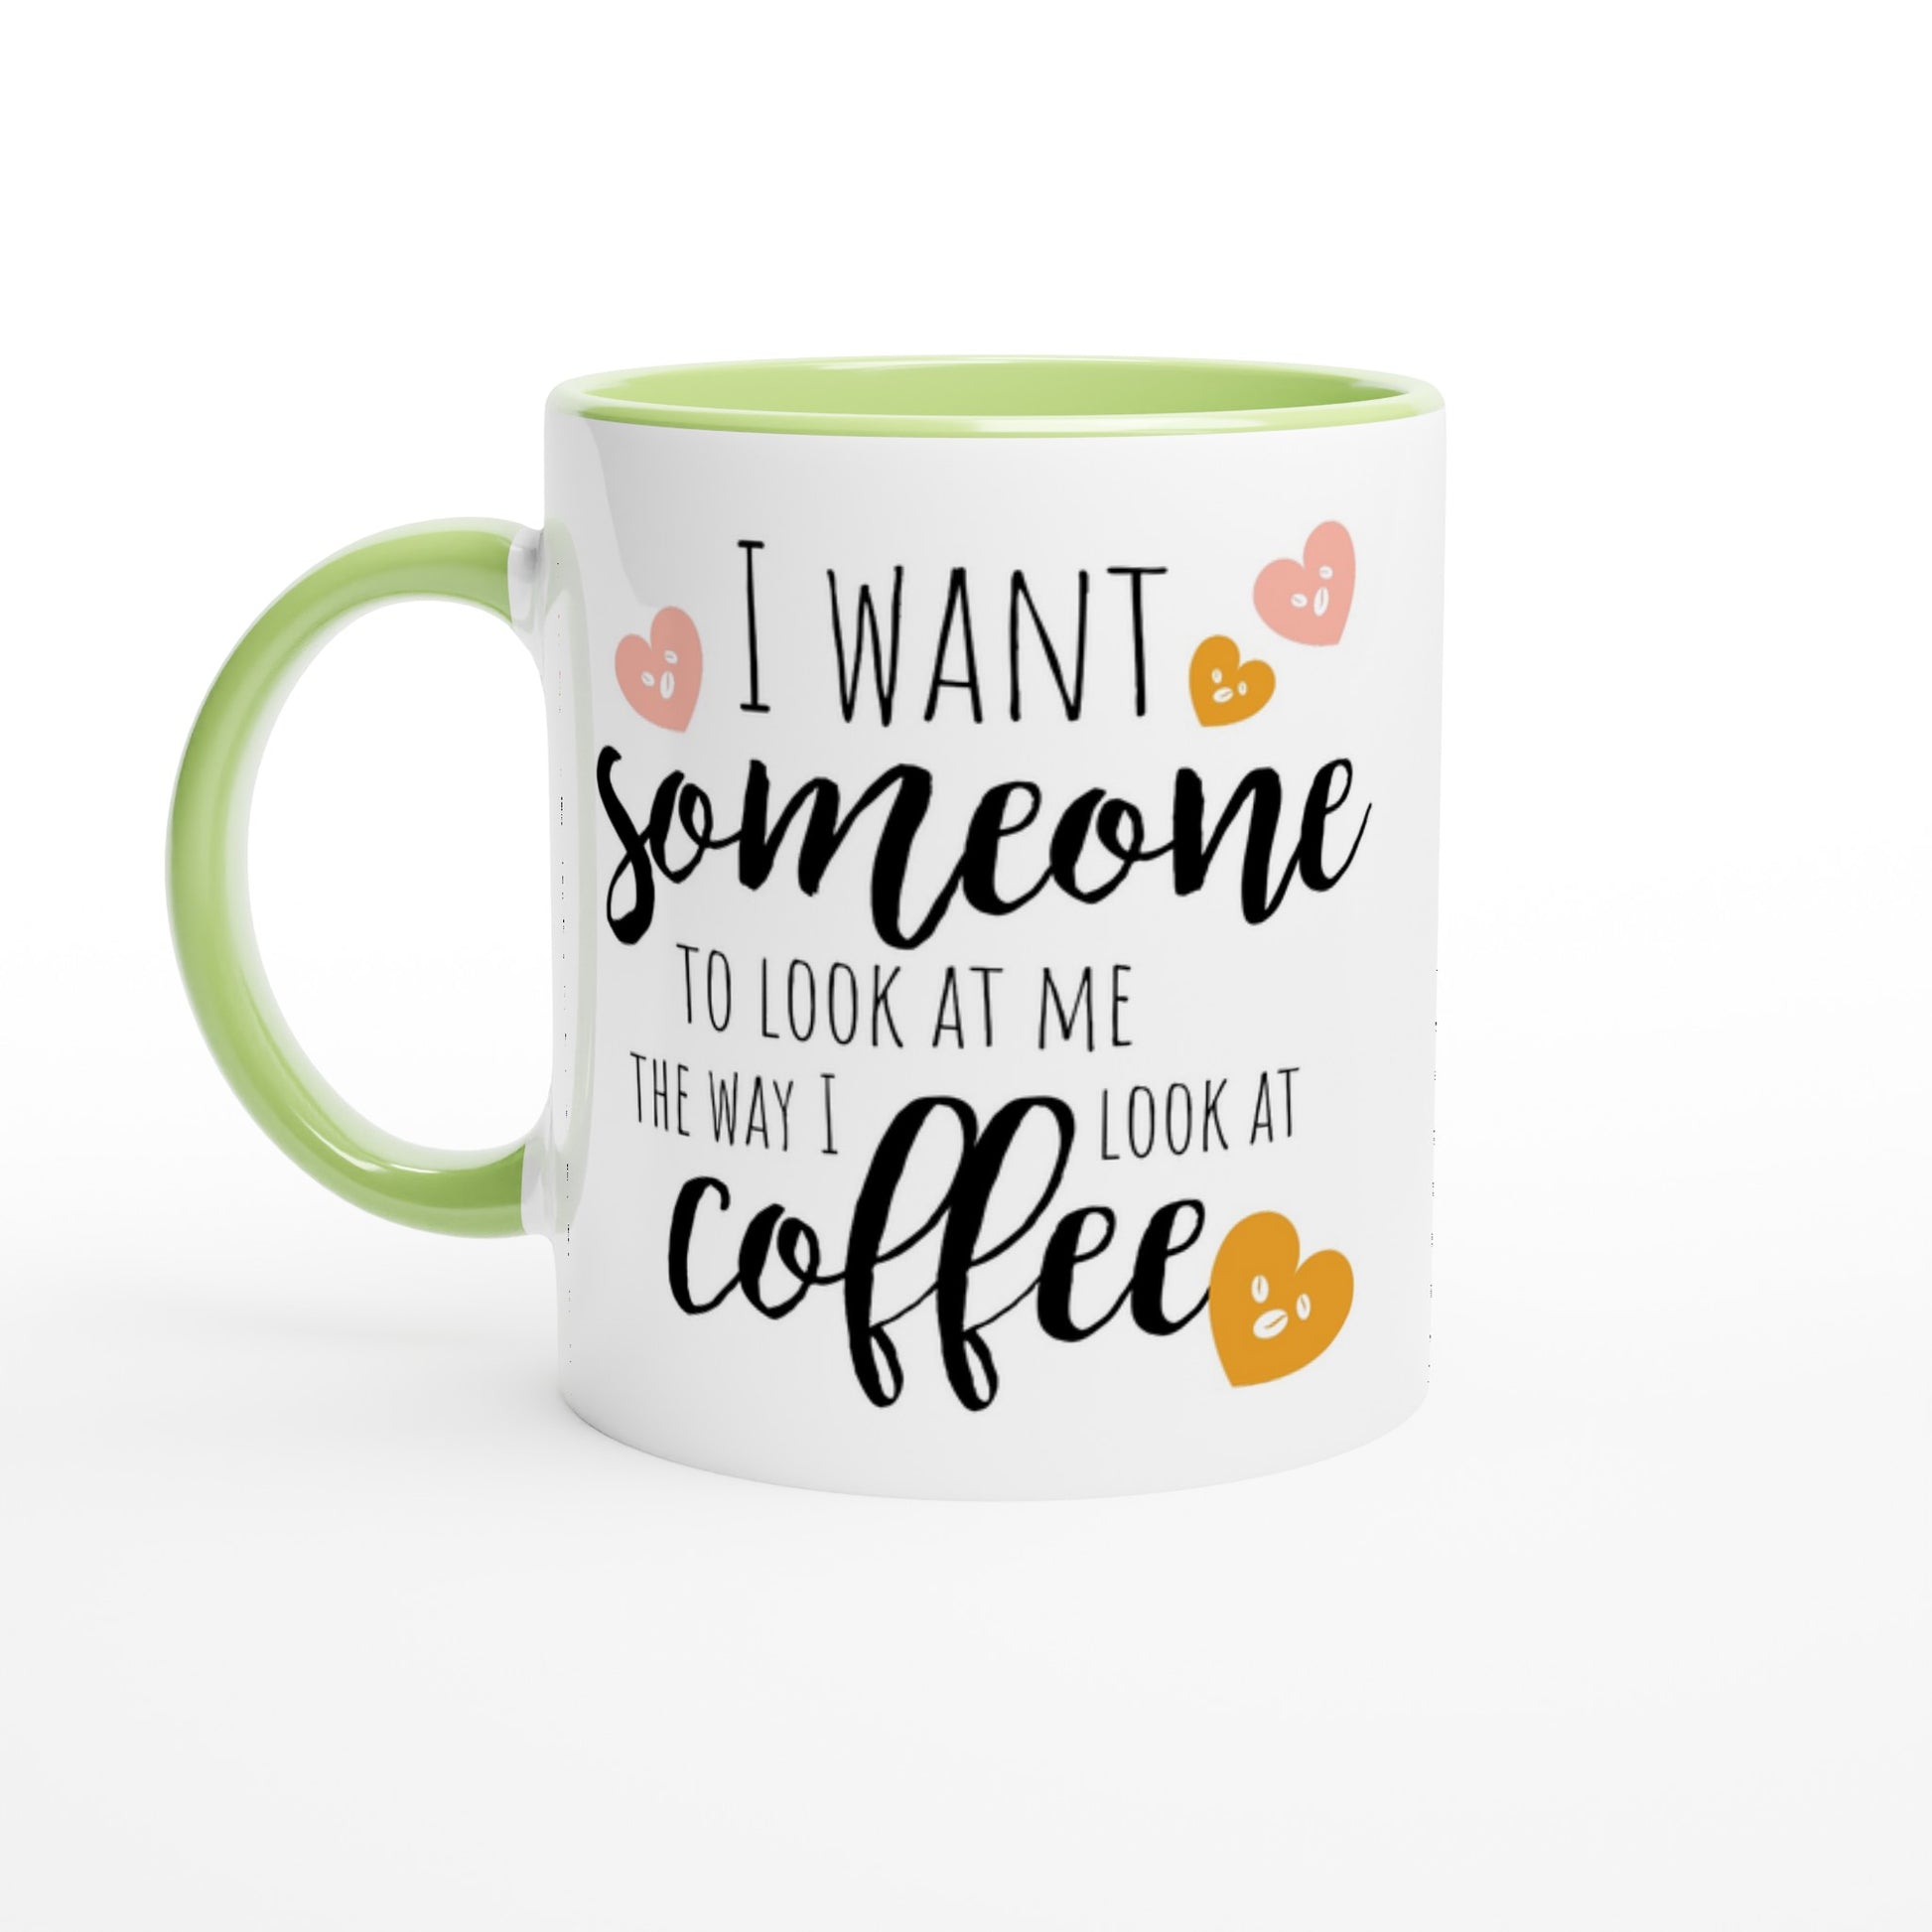 I Want Someone To Look At Me The Way I Look At Coffee - White 11oz Ceramic Mug with Colour Inside Ceramic Green Colour 11oz Mug coffee